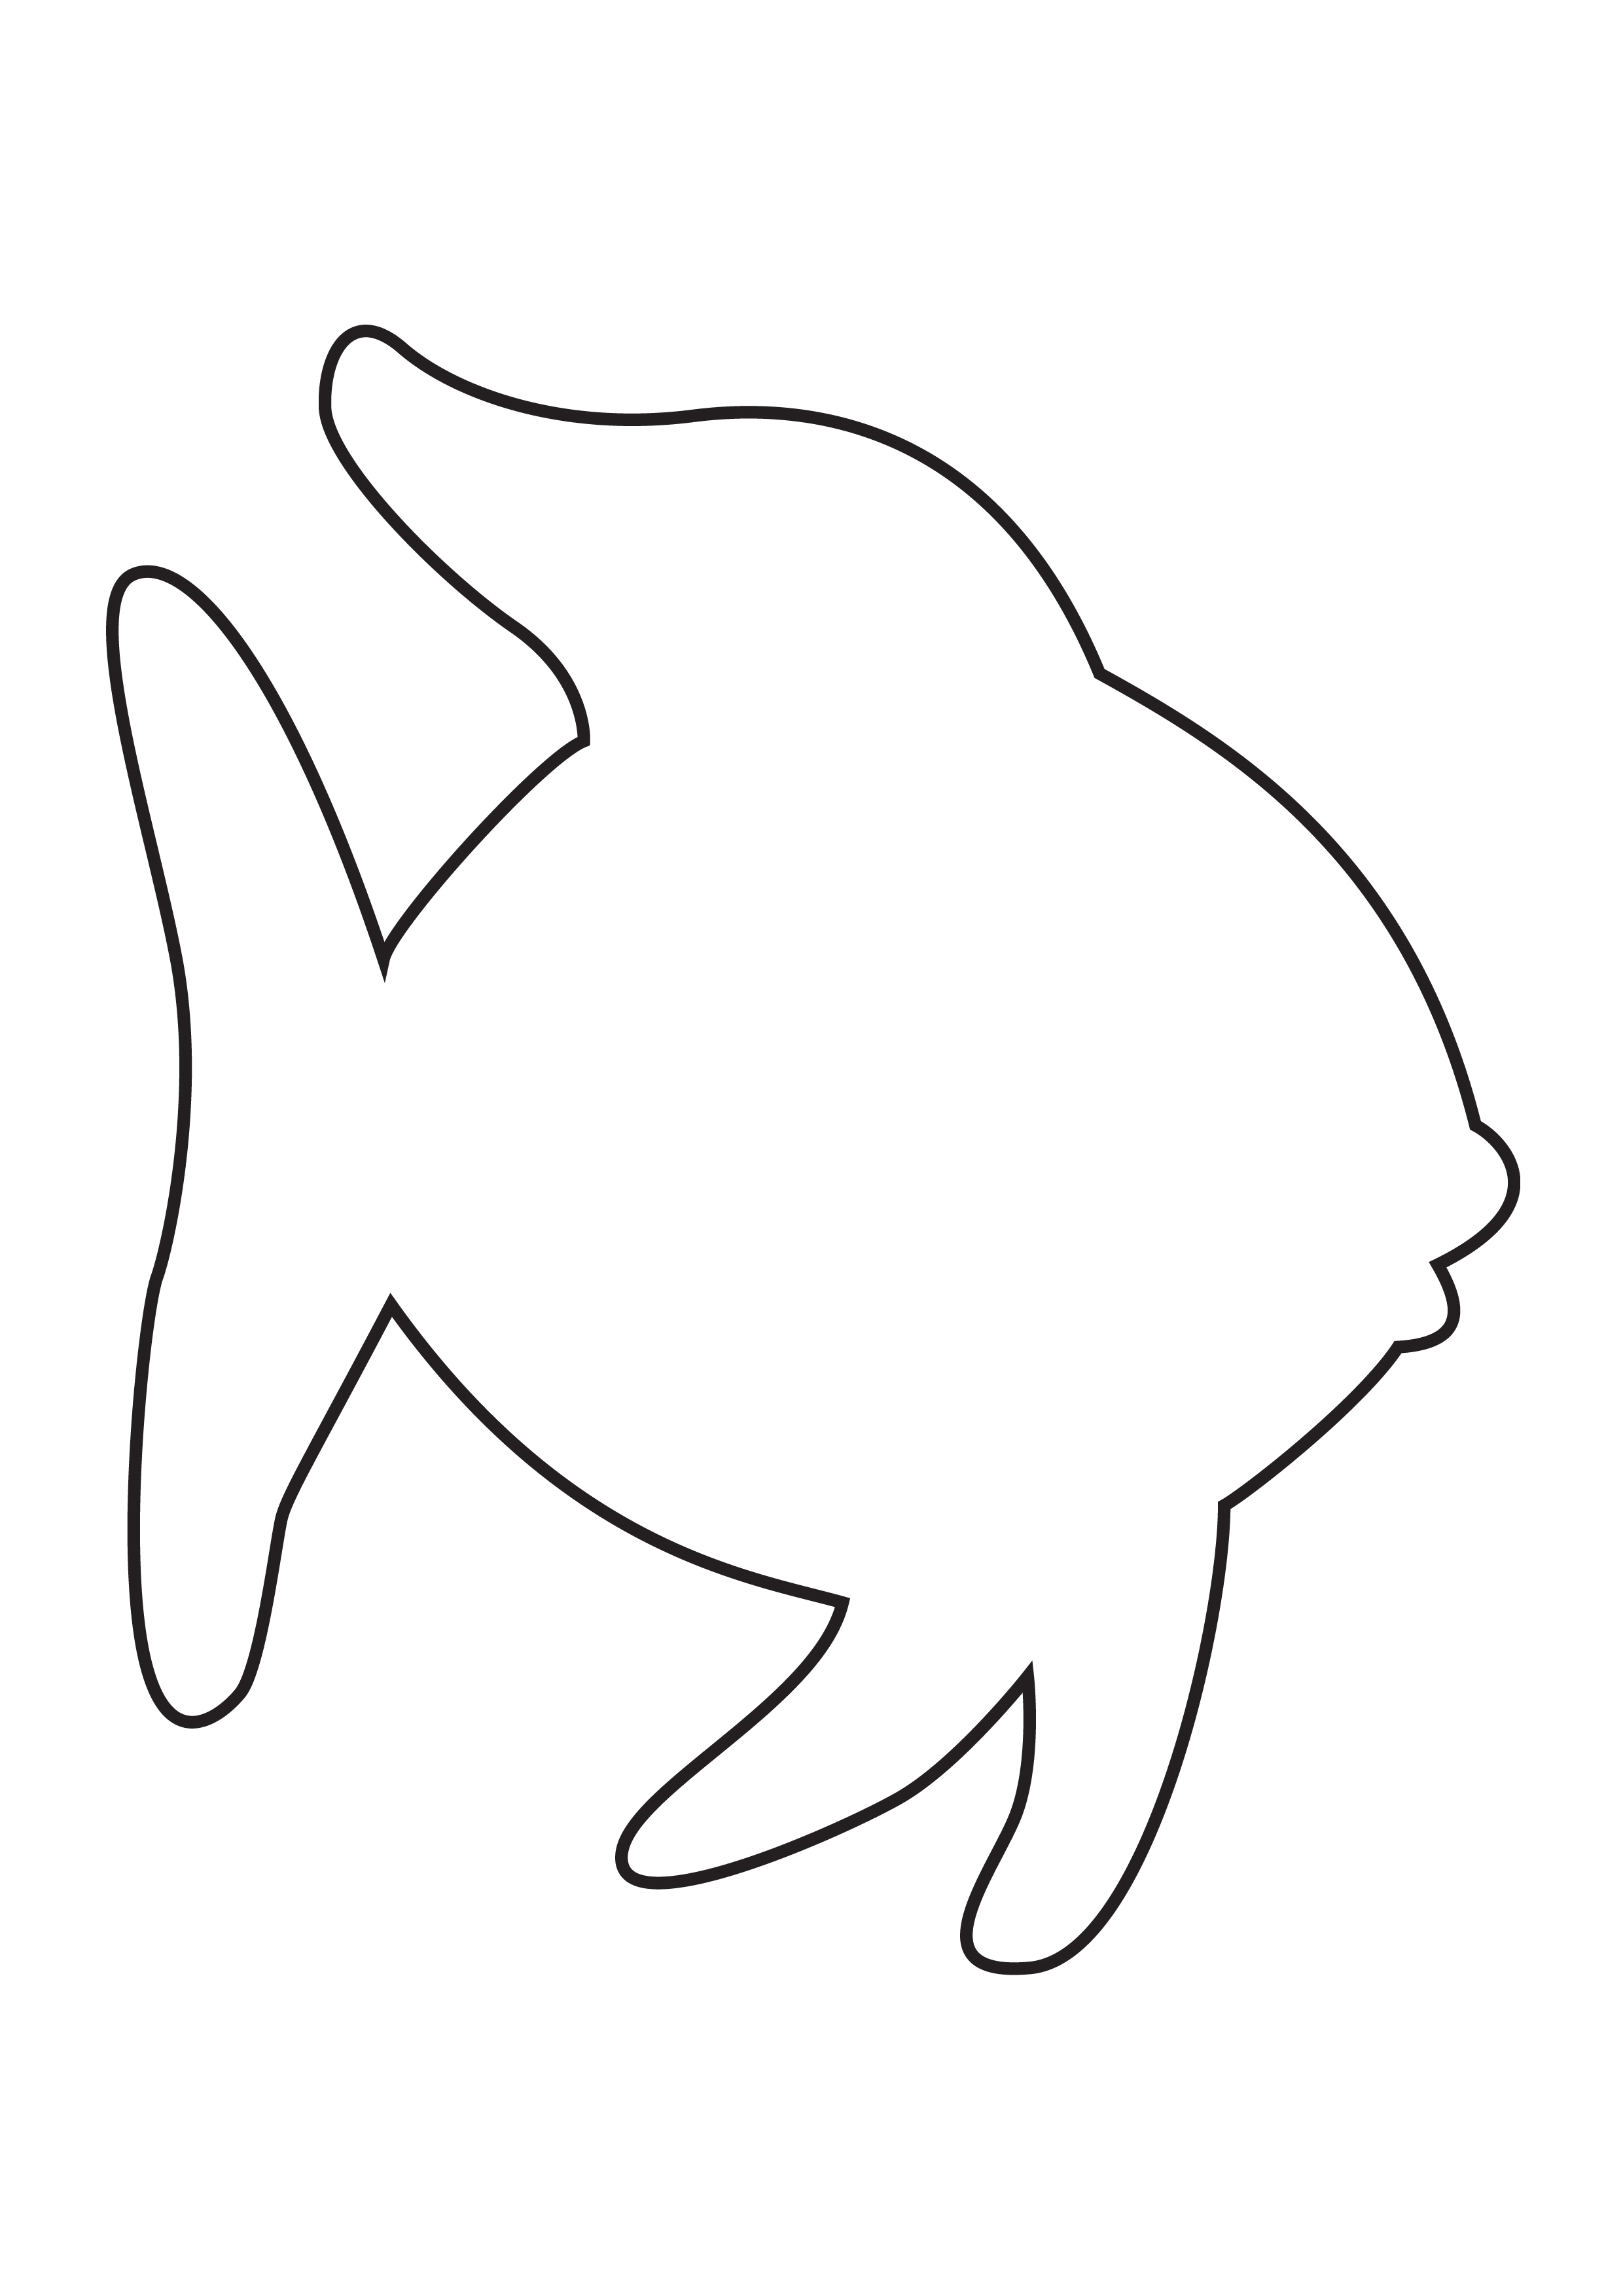 Free Fish Template Download Free Fish Template png images Free